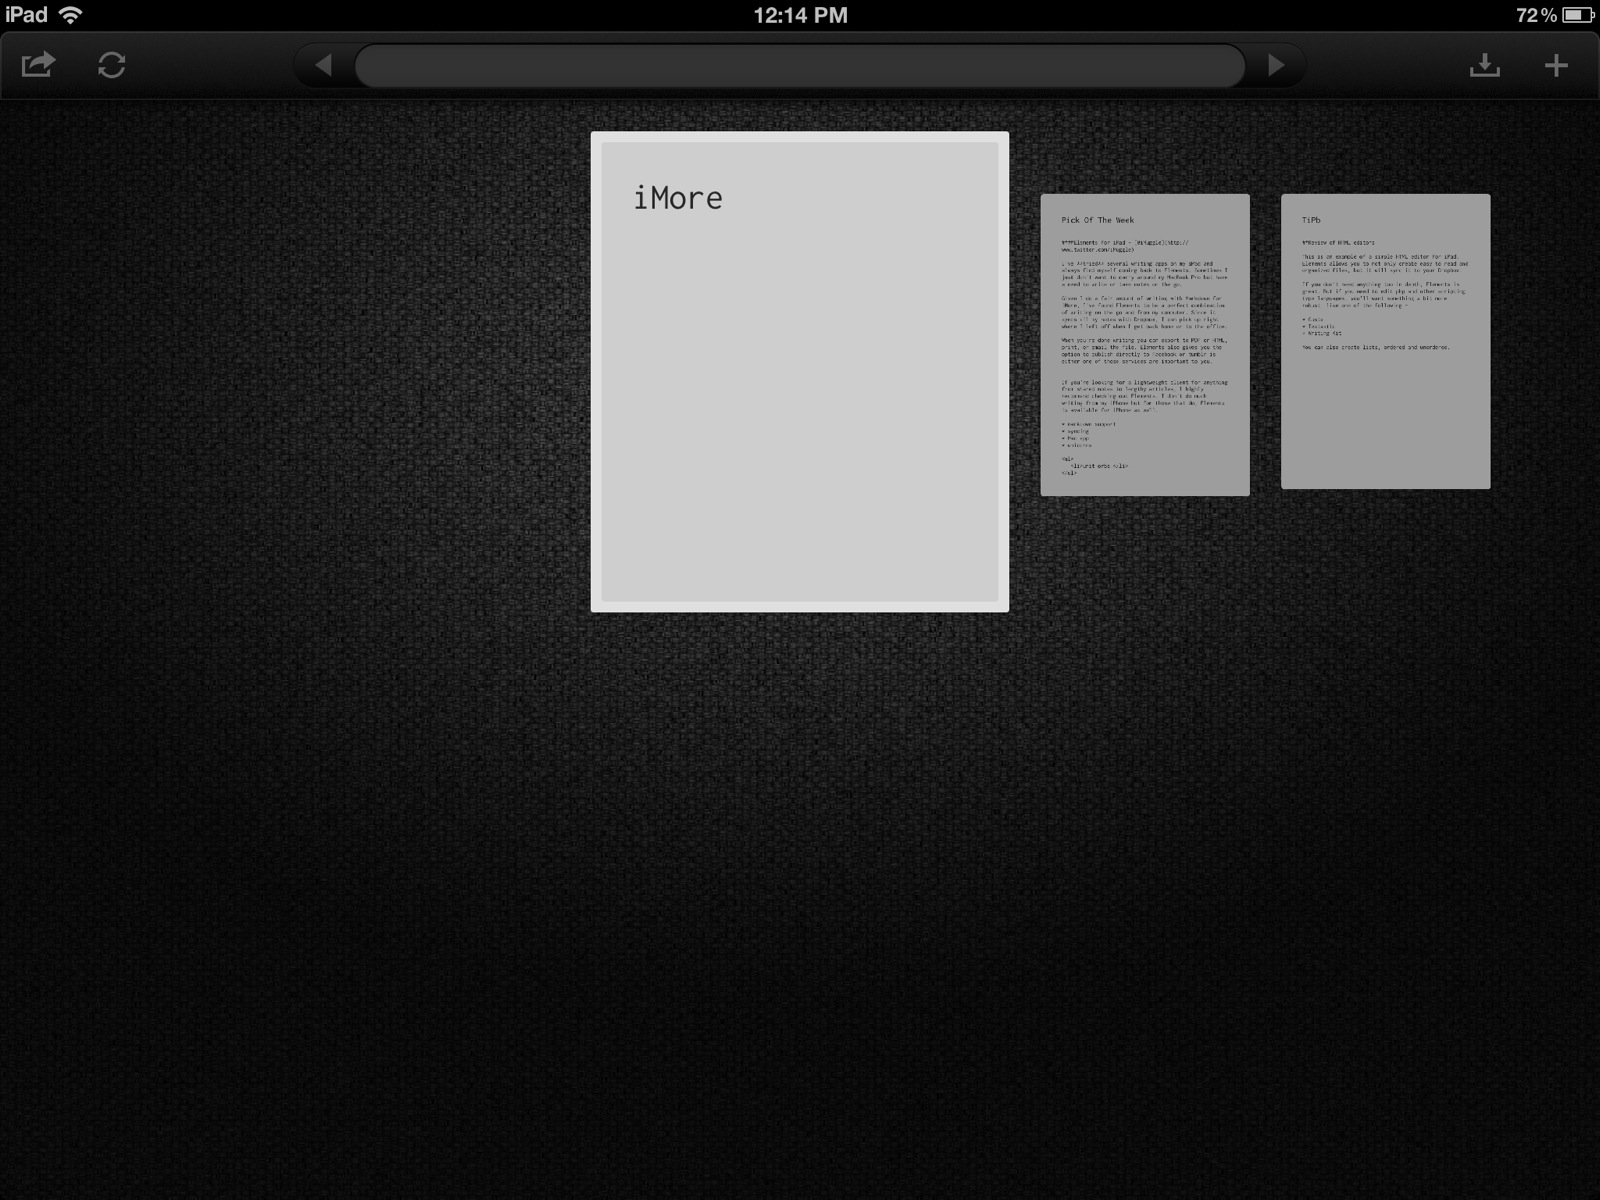 Take notes quickly with the simple layout in Daedalus for iPad